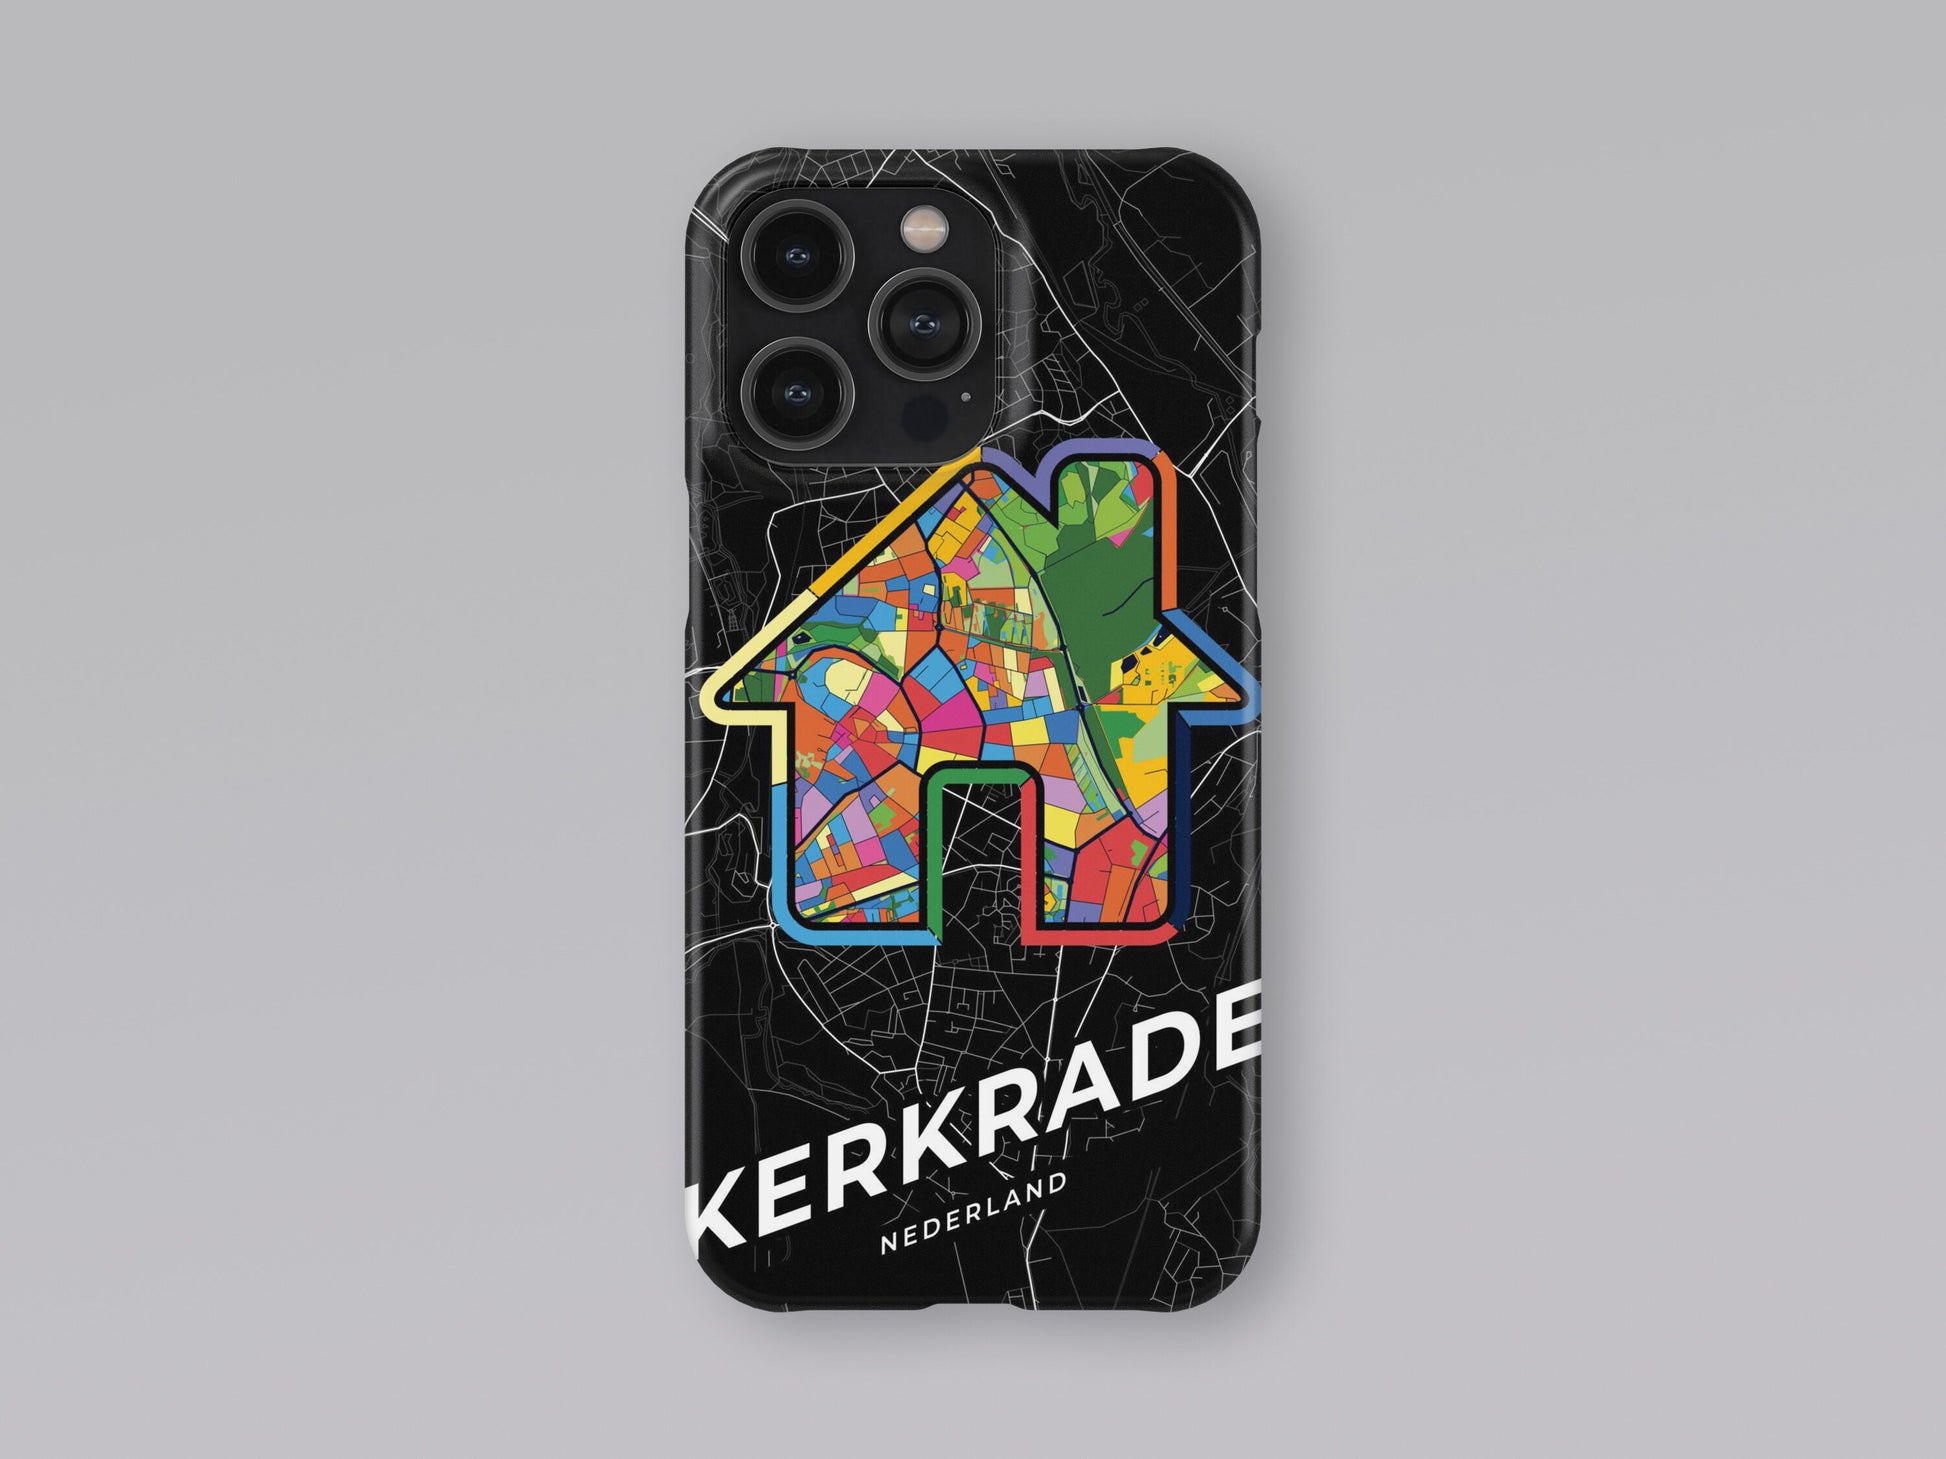 Kerkrade Netherlands slim phone case with colorful icon. Birthday, wedding or housewarming gift. Couple match cases. 3